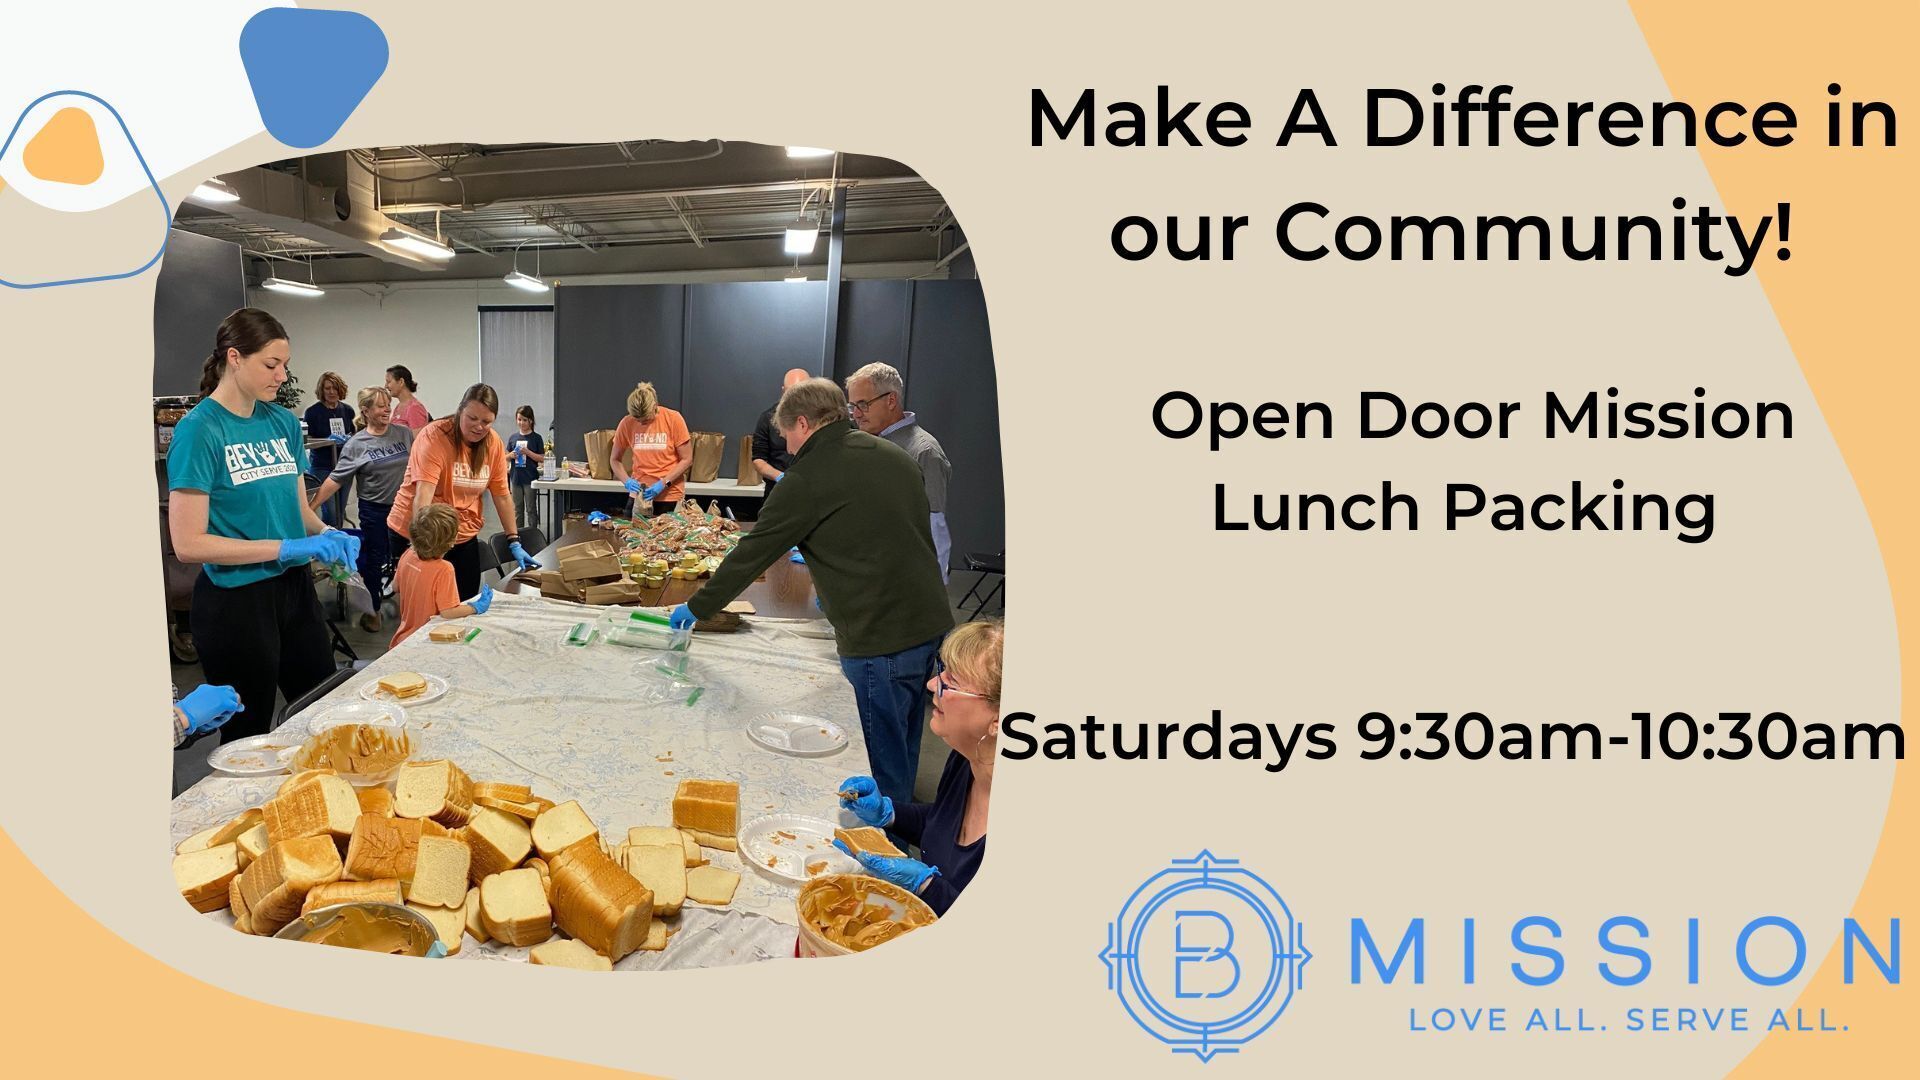 Open Door Mission Lunches